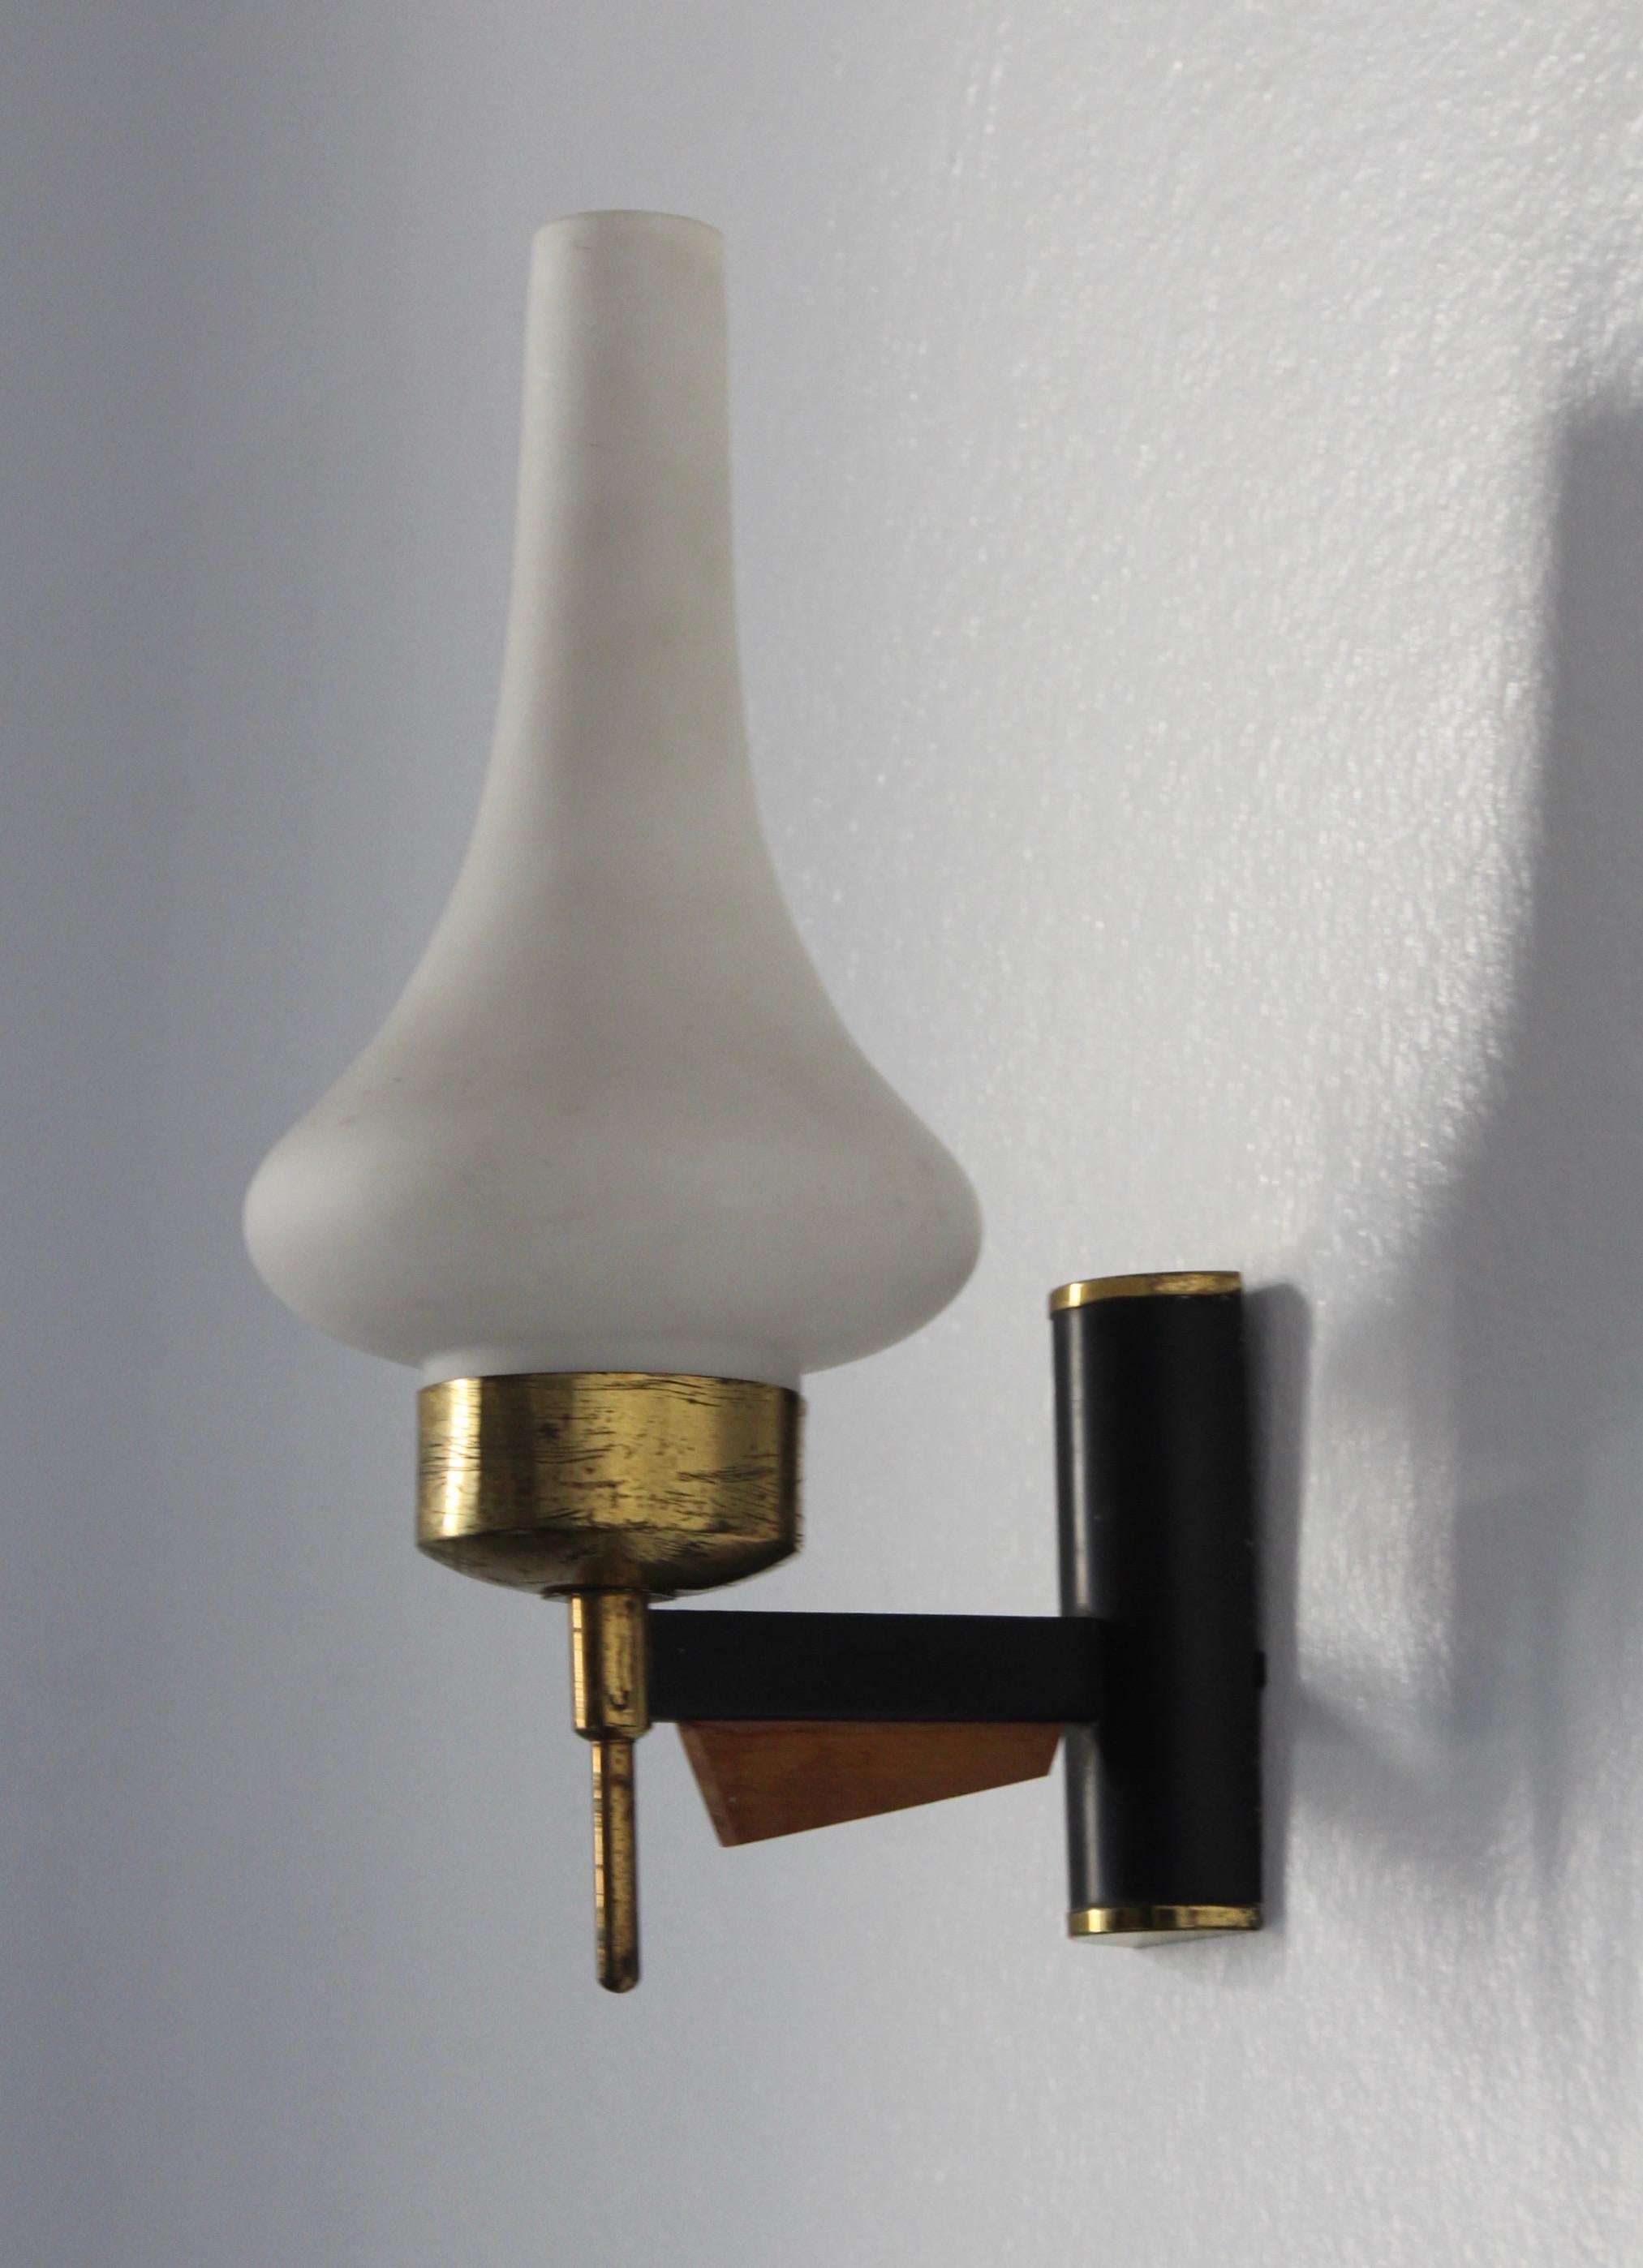 A pair of wall light / sconces. Designed and produced in Italy, 1950s. Features brass, black-lacquered metal, teak, and Milk Glass.

Lights presents with beautiful all original patina.

Measurement doesn't include bulbs. Fixture needs to be